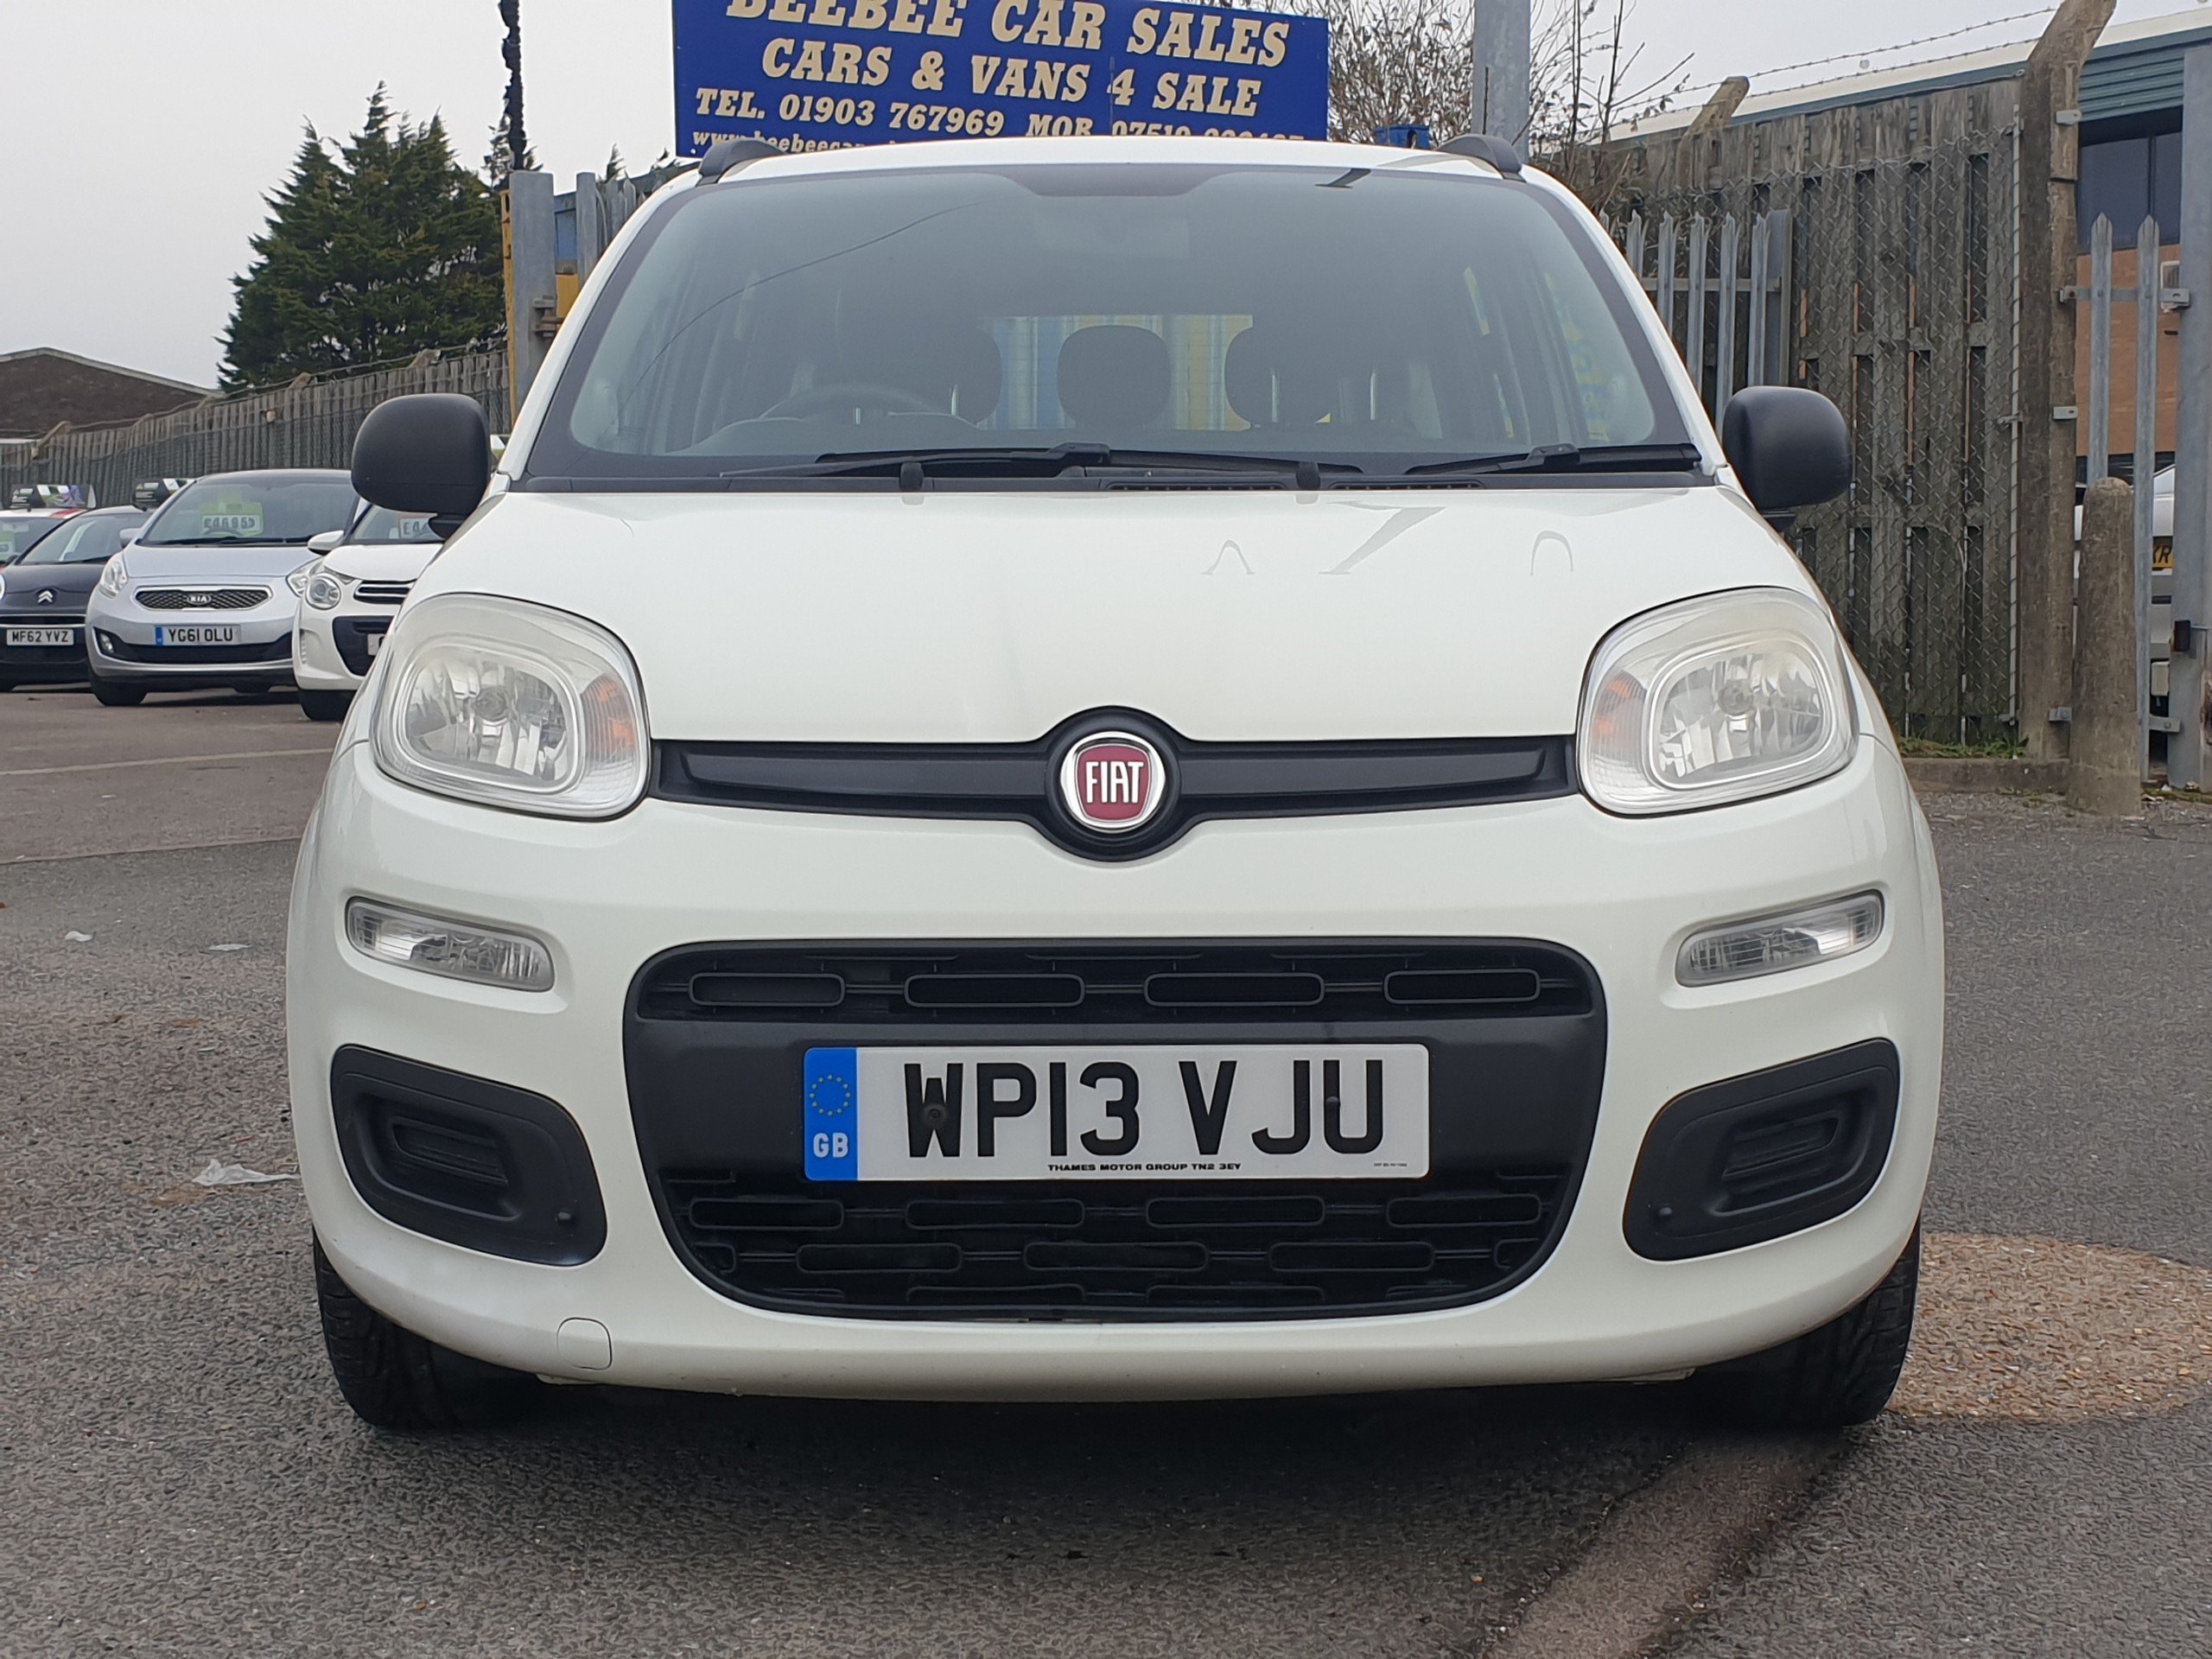 Sold 2013 Fiat Panda 1.2 Easy 5dr, Lancing, West Sussex | Bee Bee Car Sales